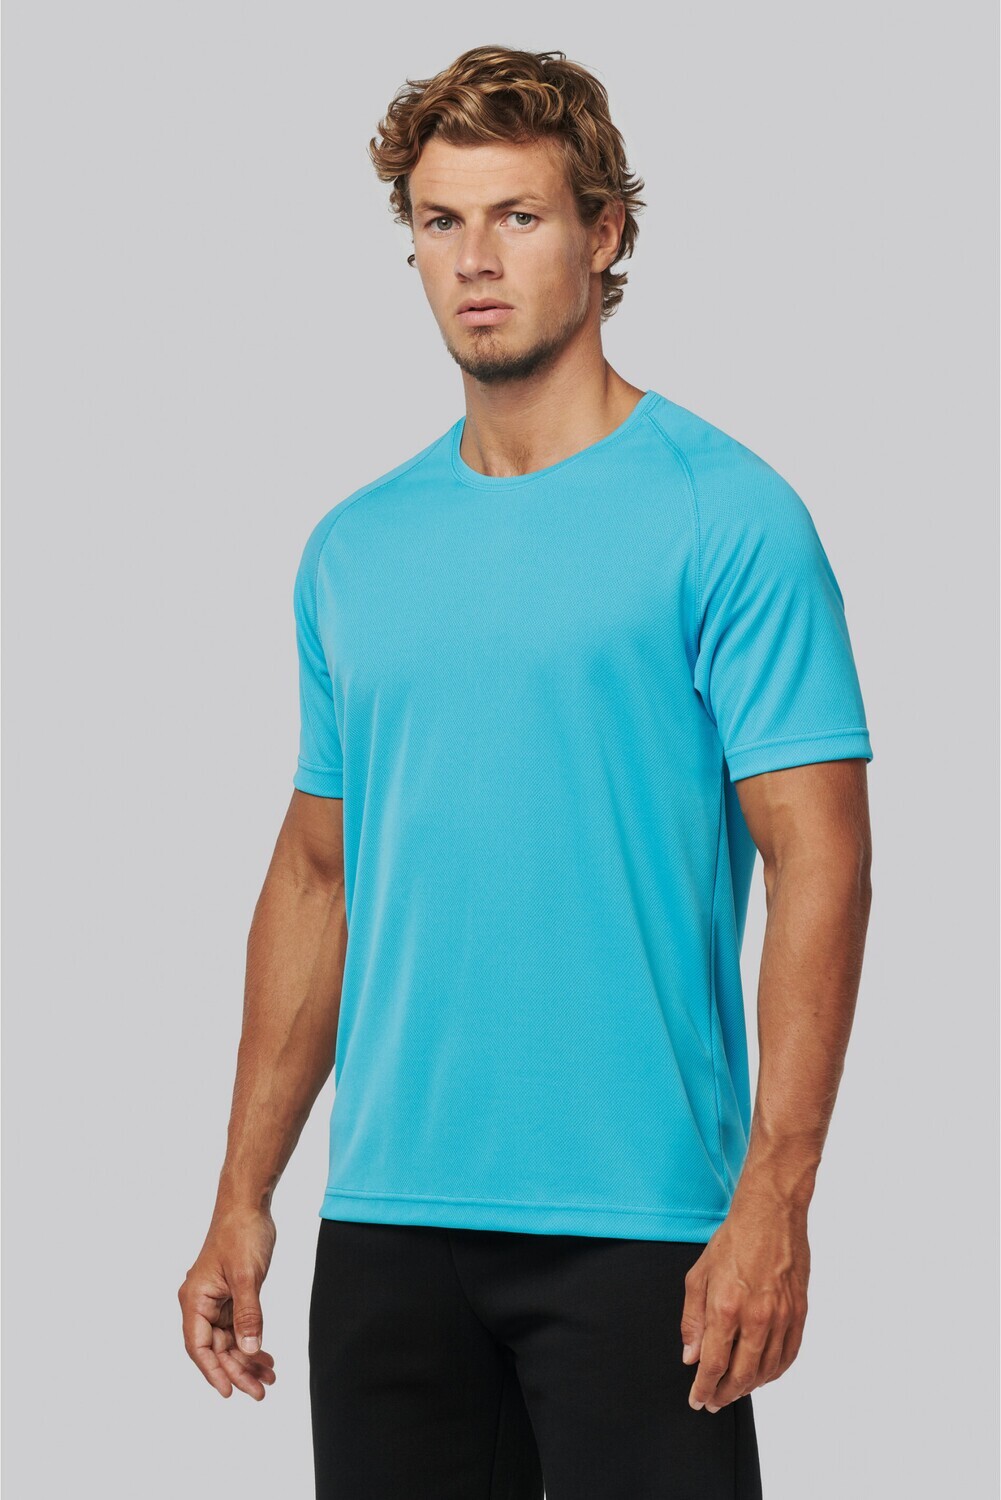 Sport Shirt - Quick Dry - 100% polyester -ProAct